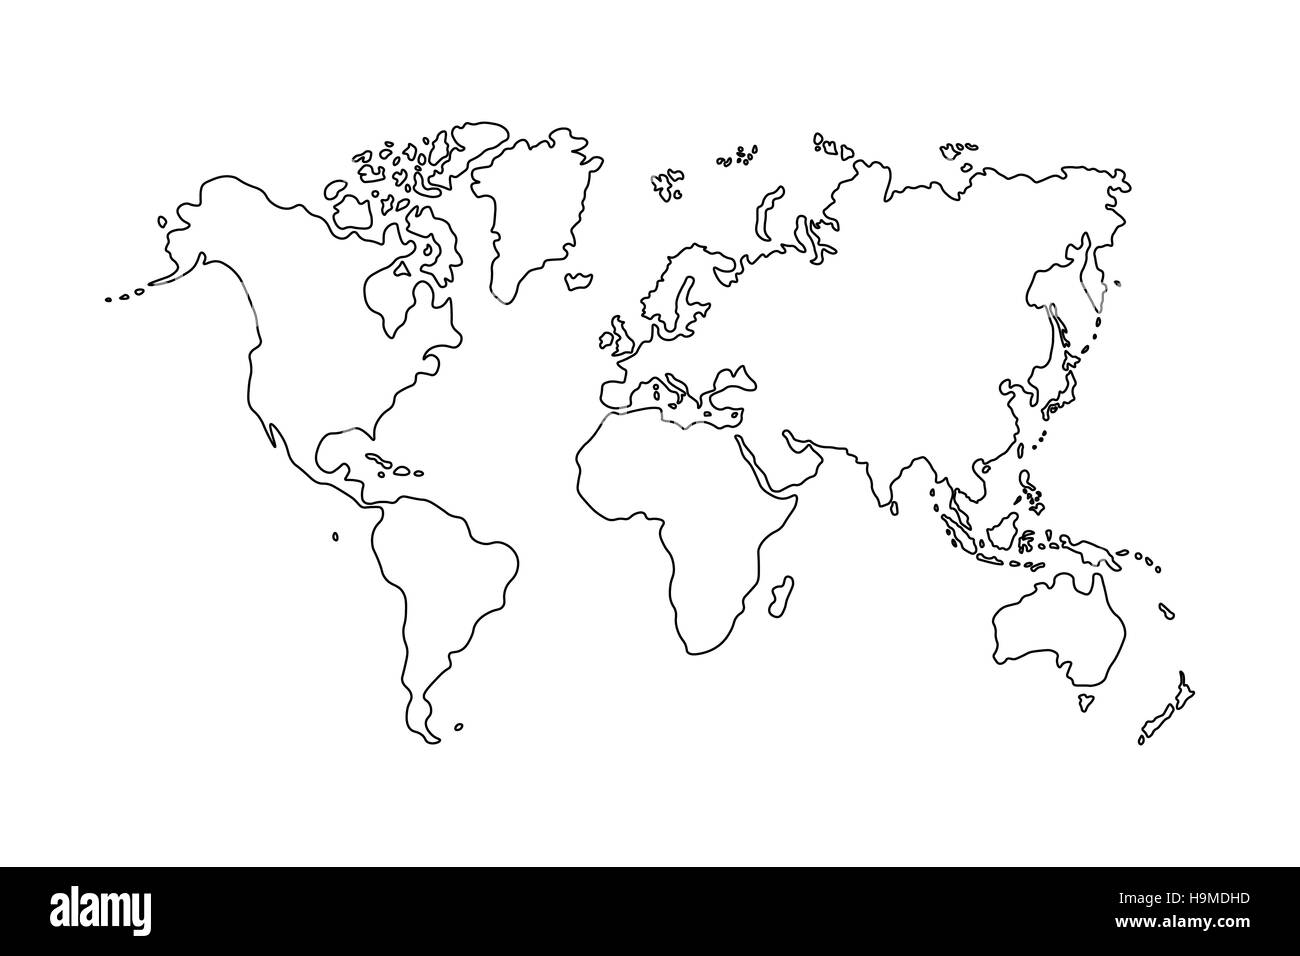 Map of world cartoon Black and White Stock Photos & Images - Alamy